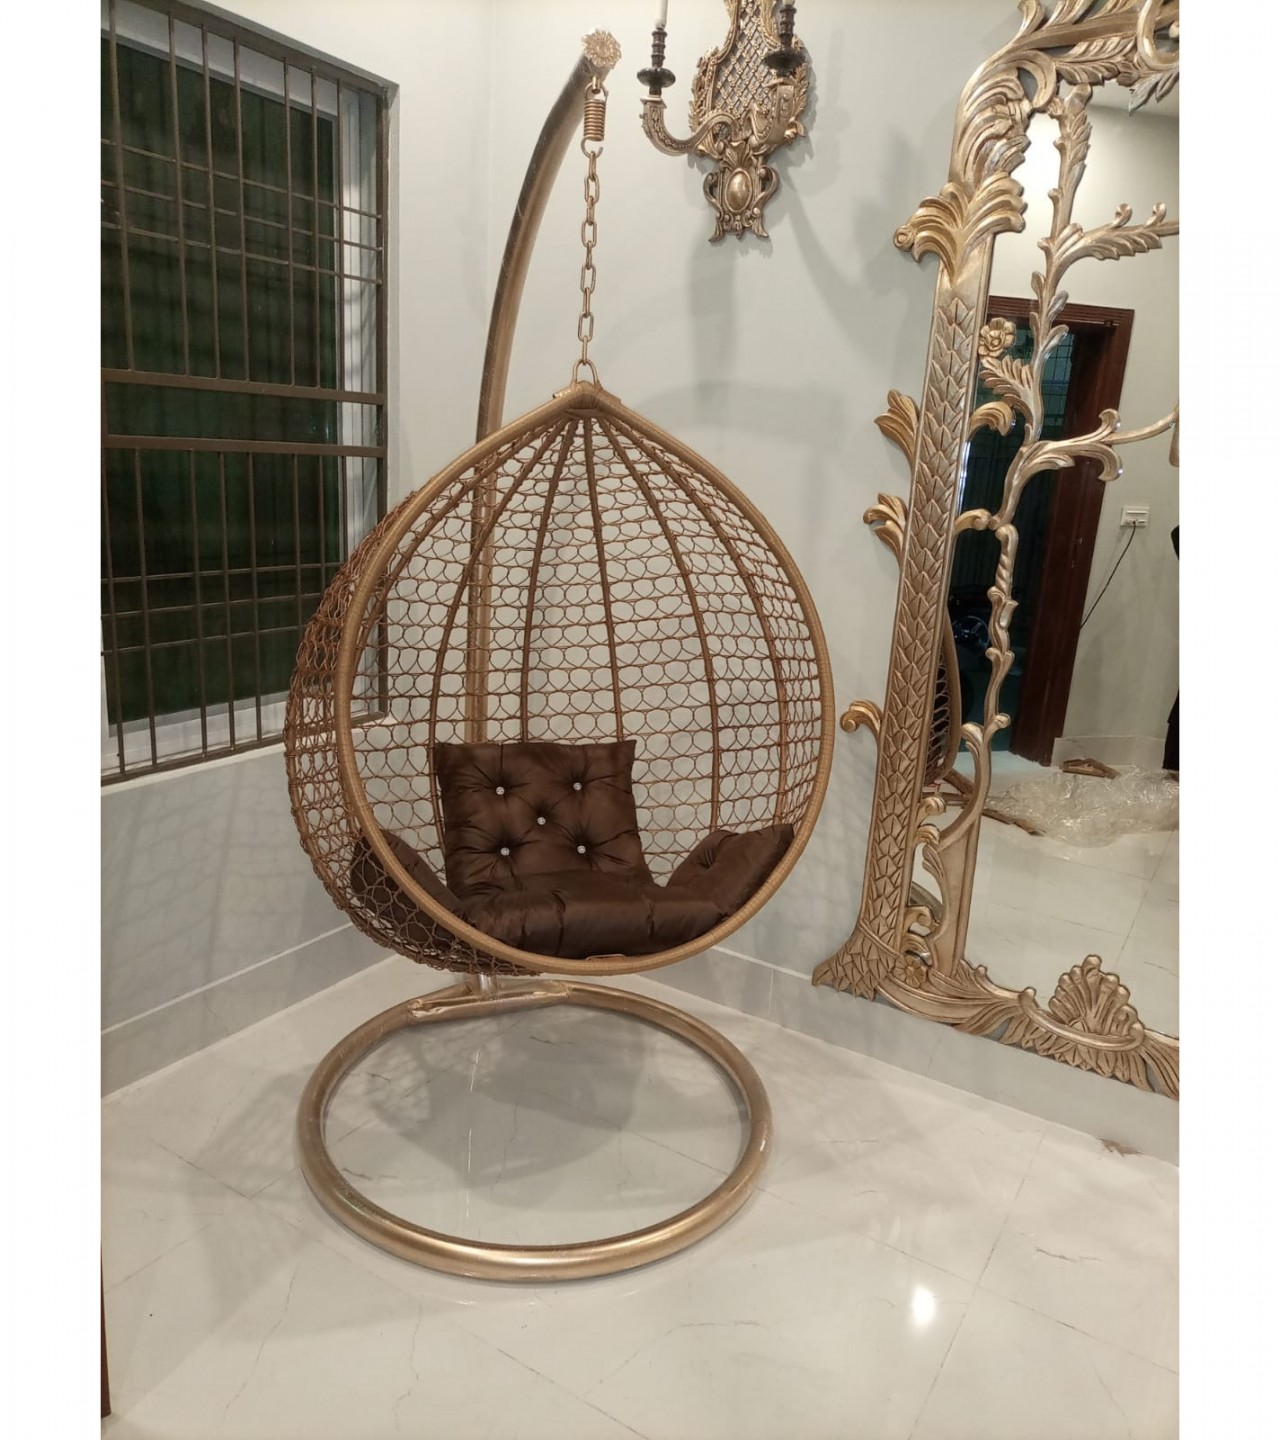 Egg Shape Hanging Golden Ring Net Swing Chair - Jhoola with Stand & Cushion For Adult